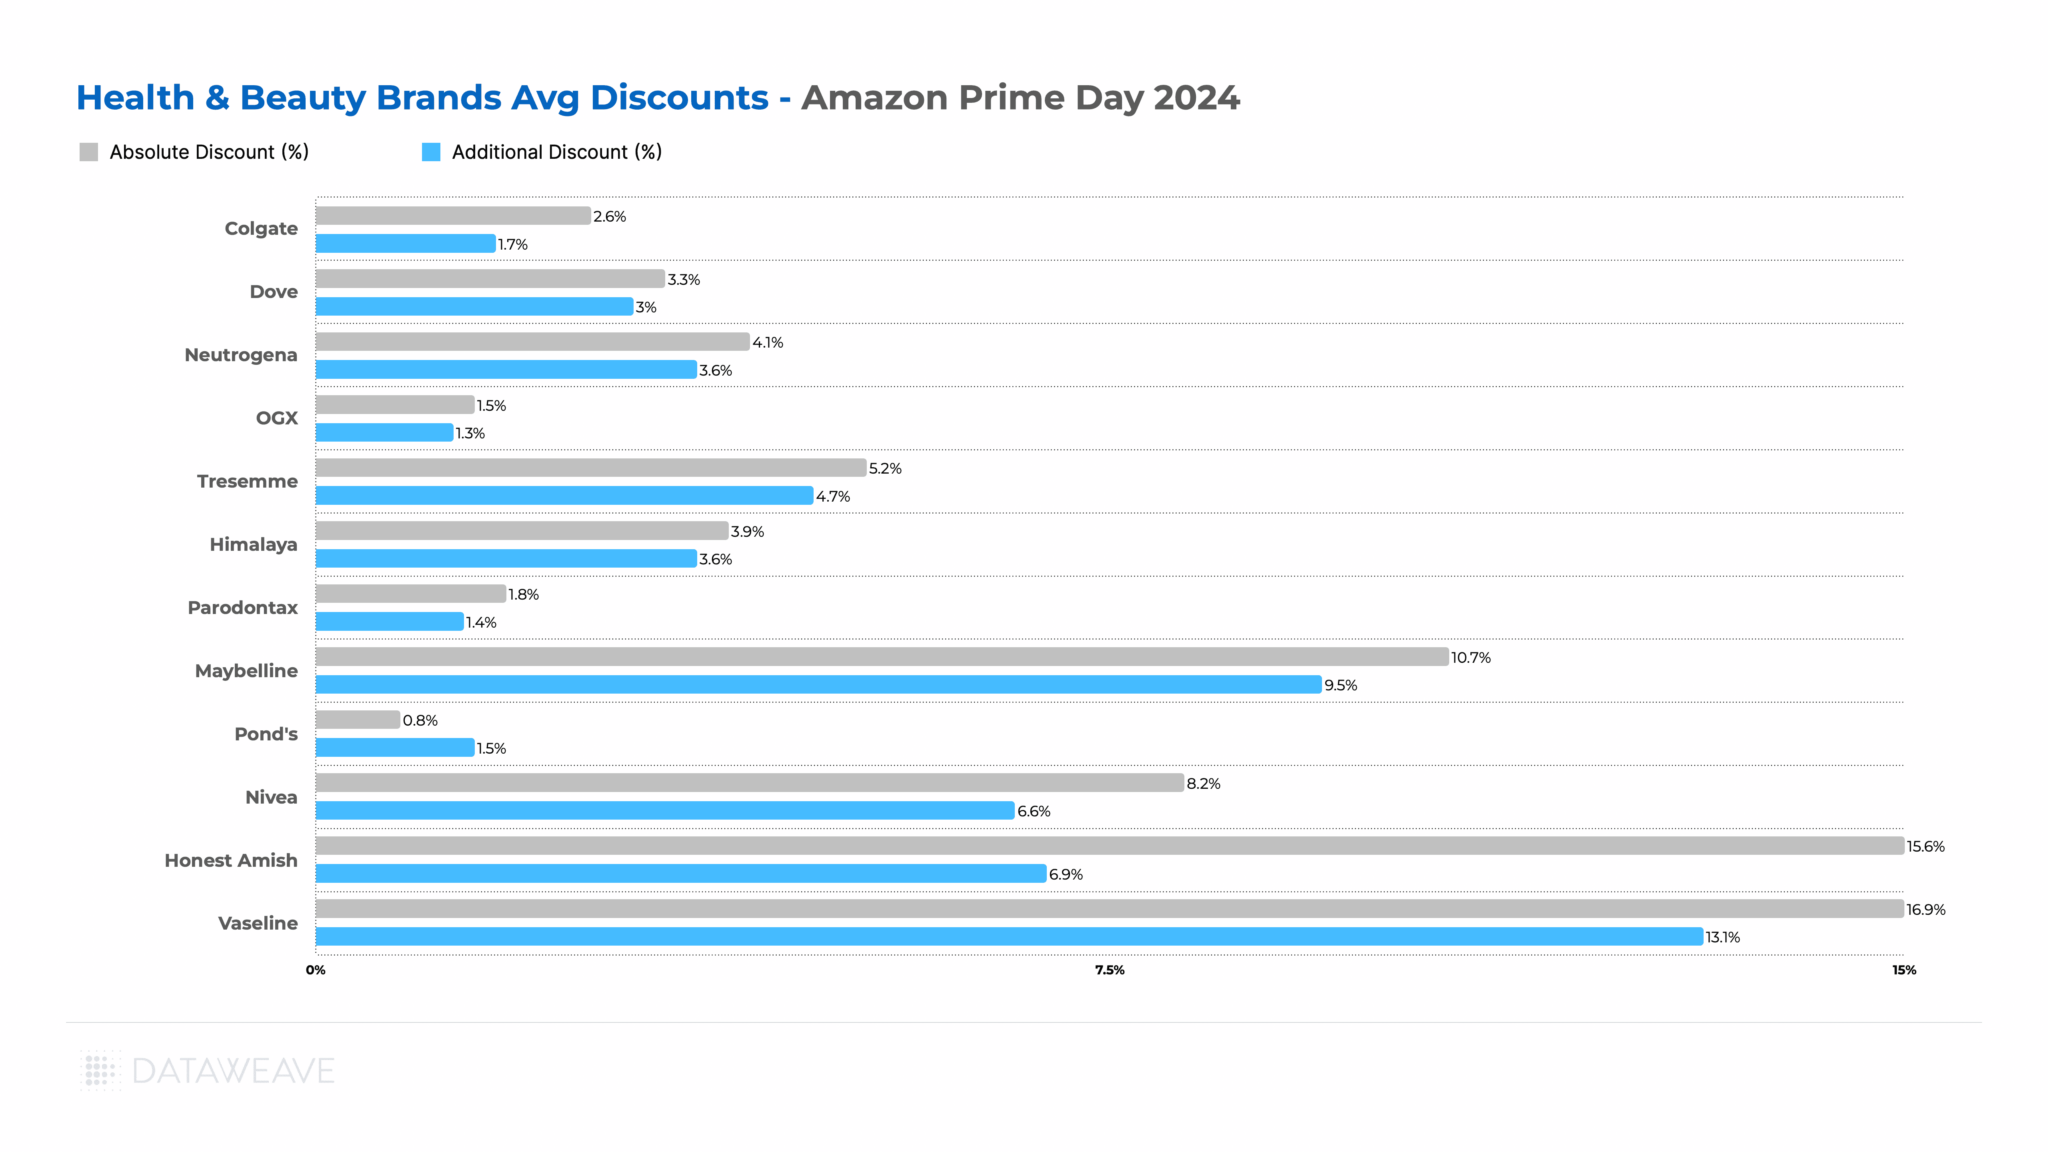 Health & Beauty Discounts Across Leading Brands_Amazon Prime Day 2024_India_ Analysis_DataWeave